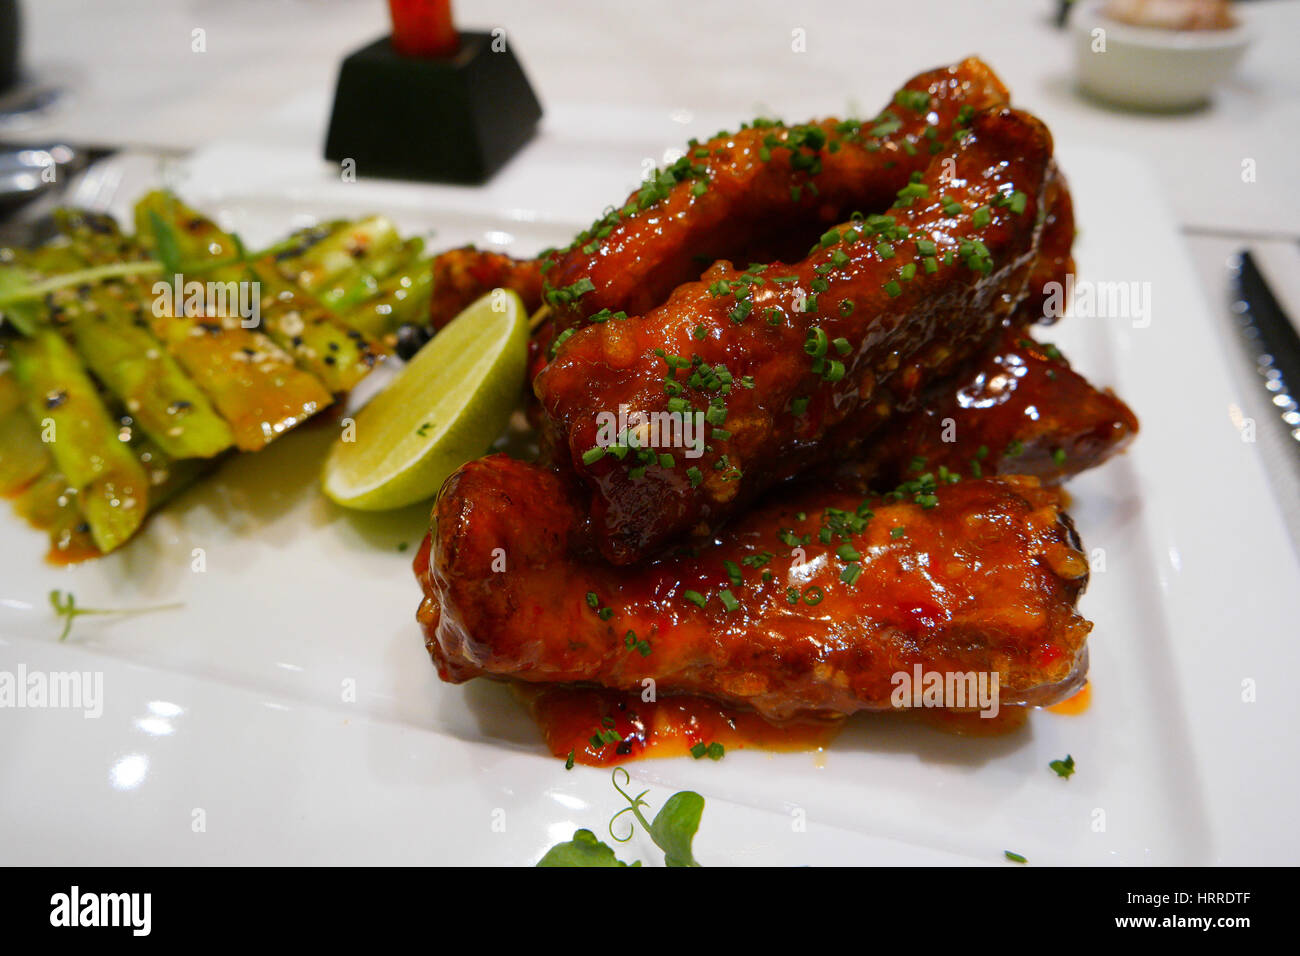 Spicy glazed ribs with an herbal dressing and asparaguses Stock Photo